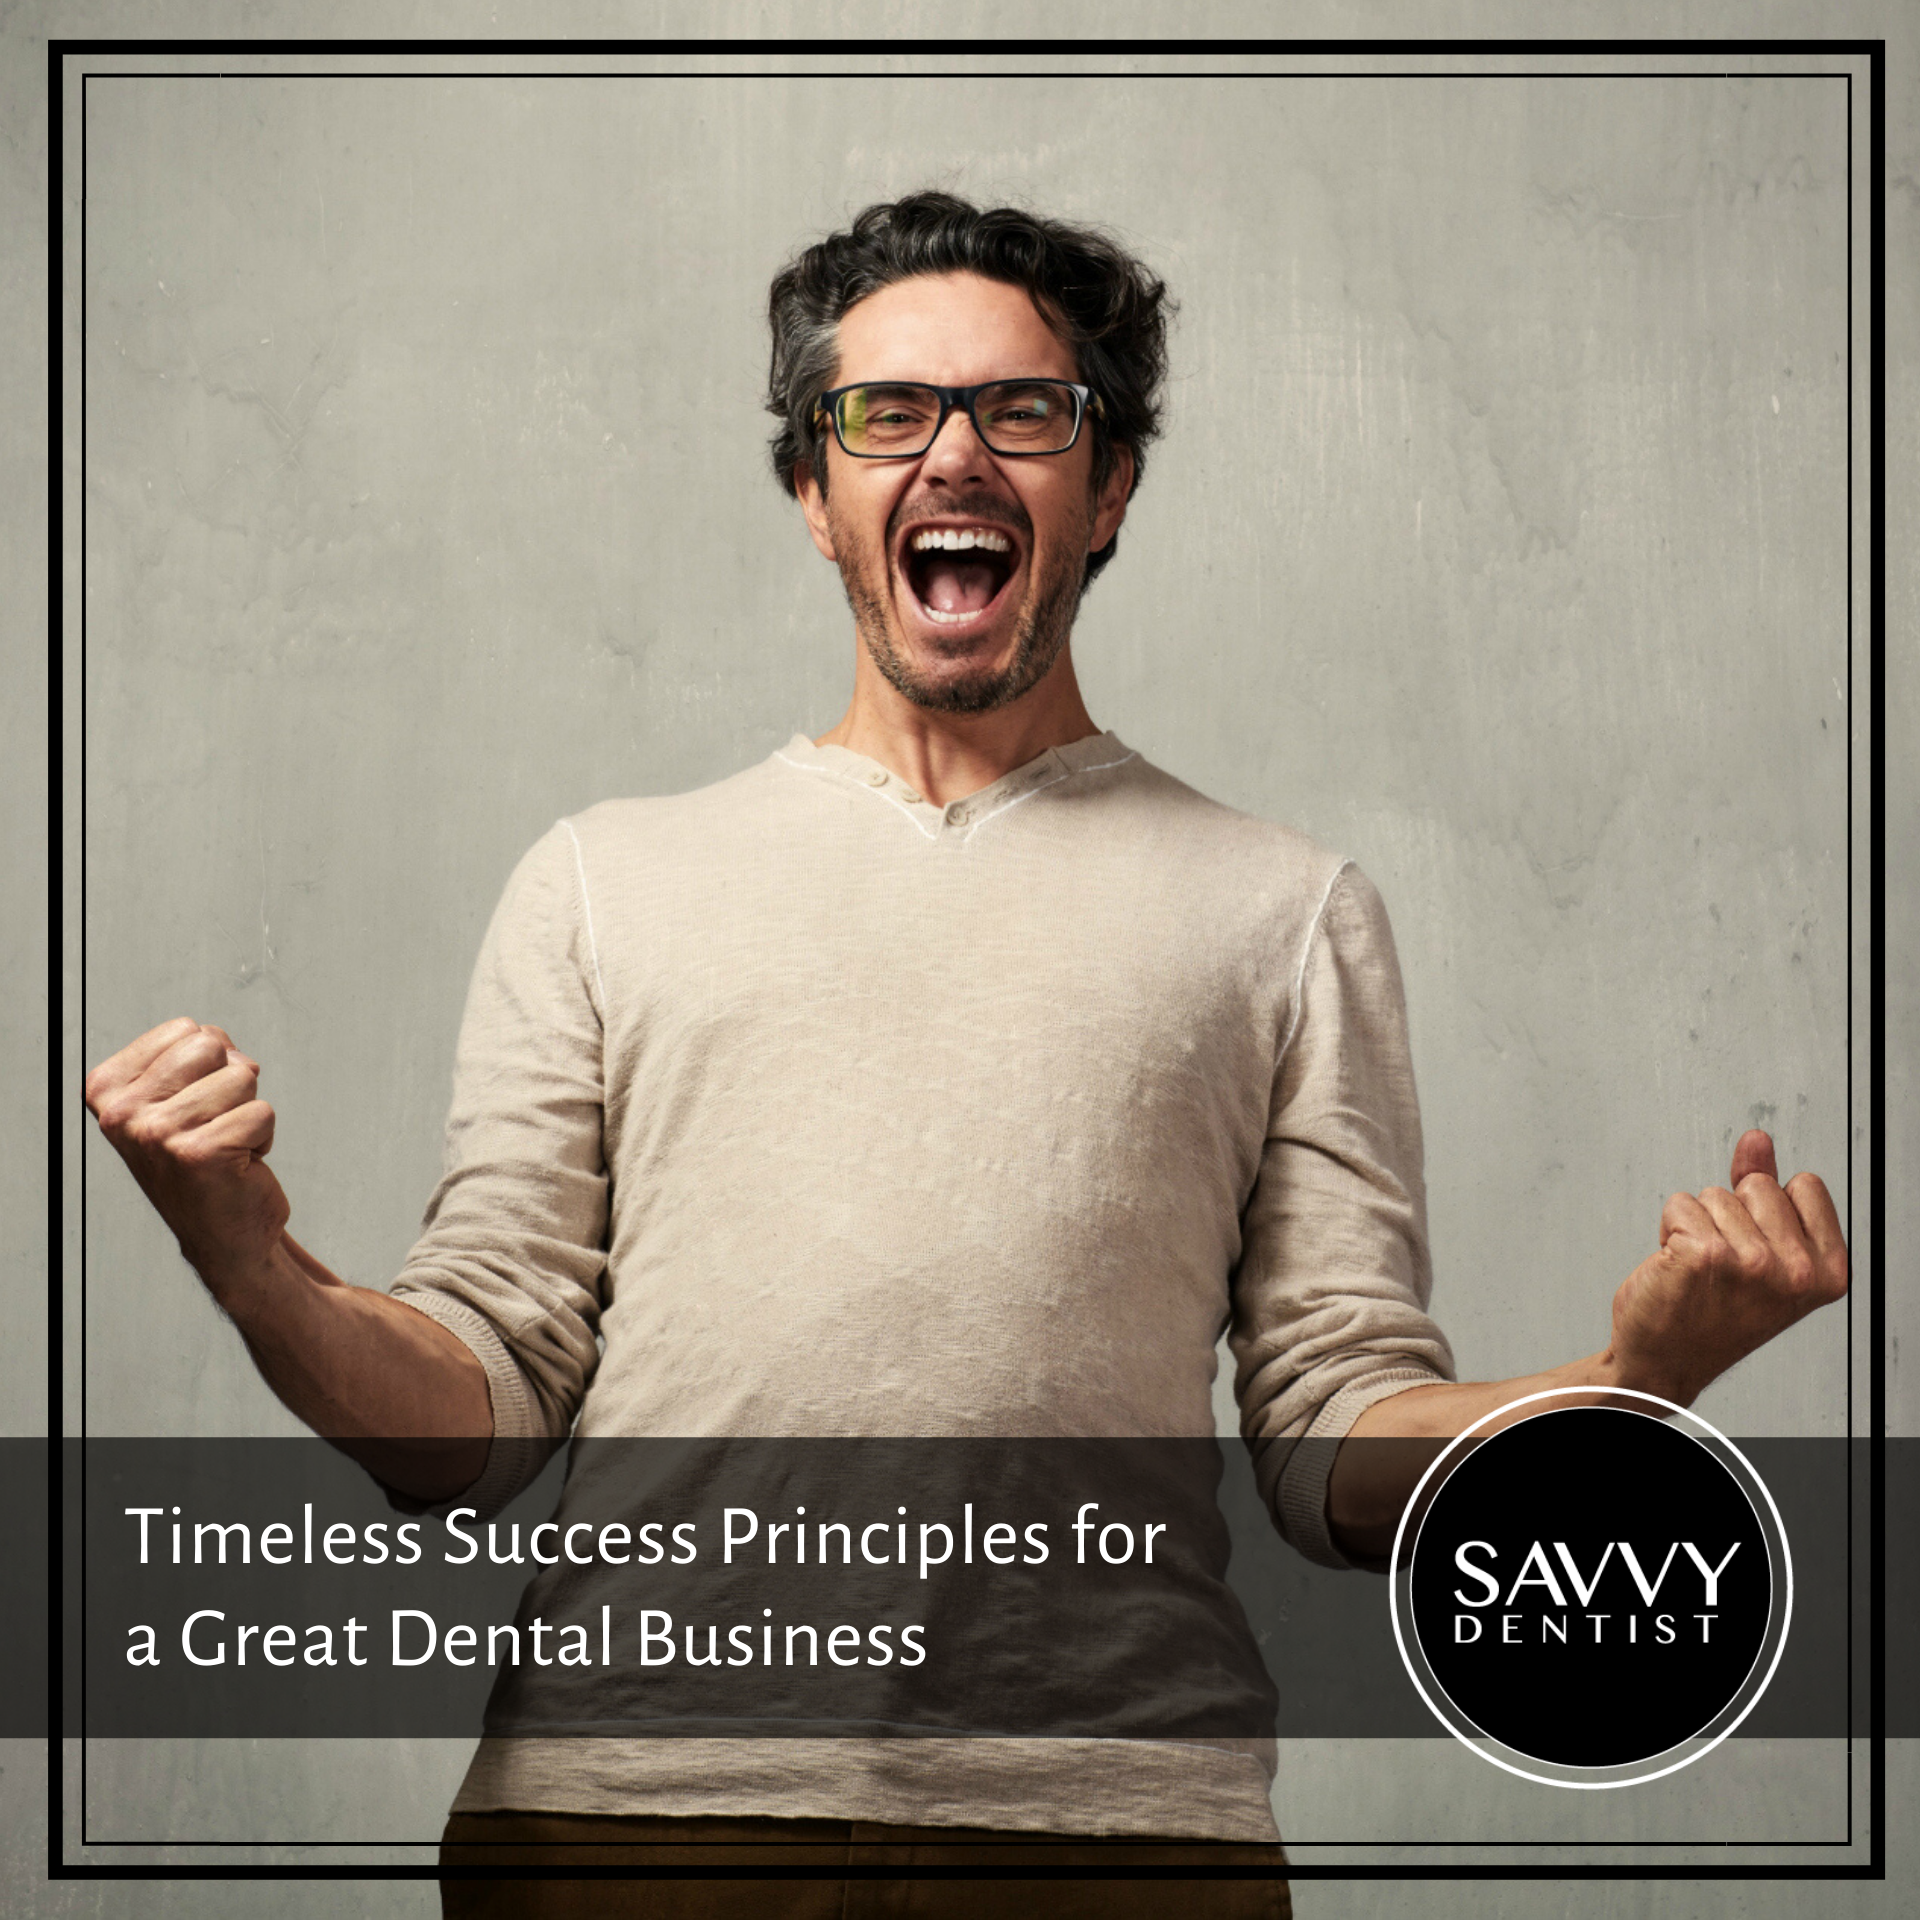 Timeless Success Principles for a Great Dental Business